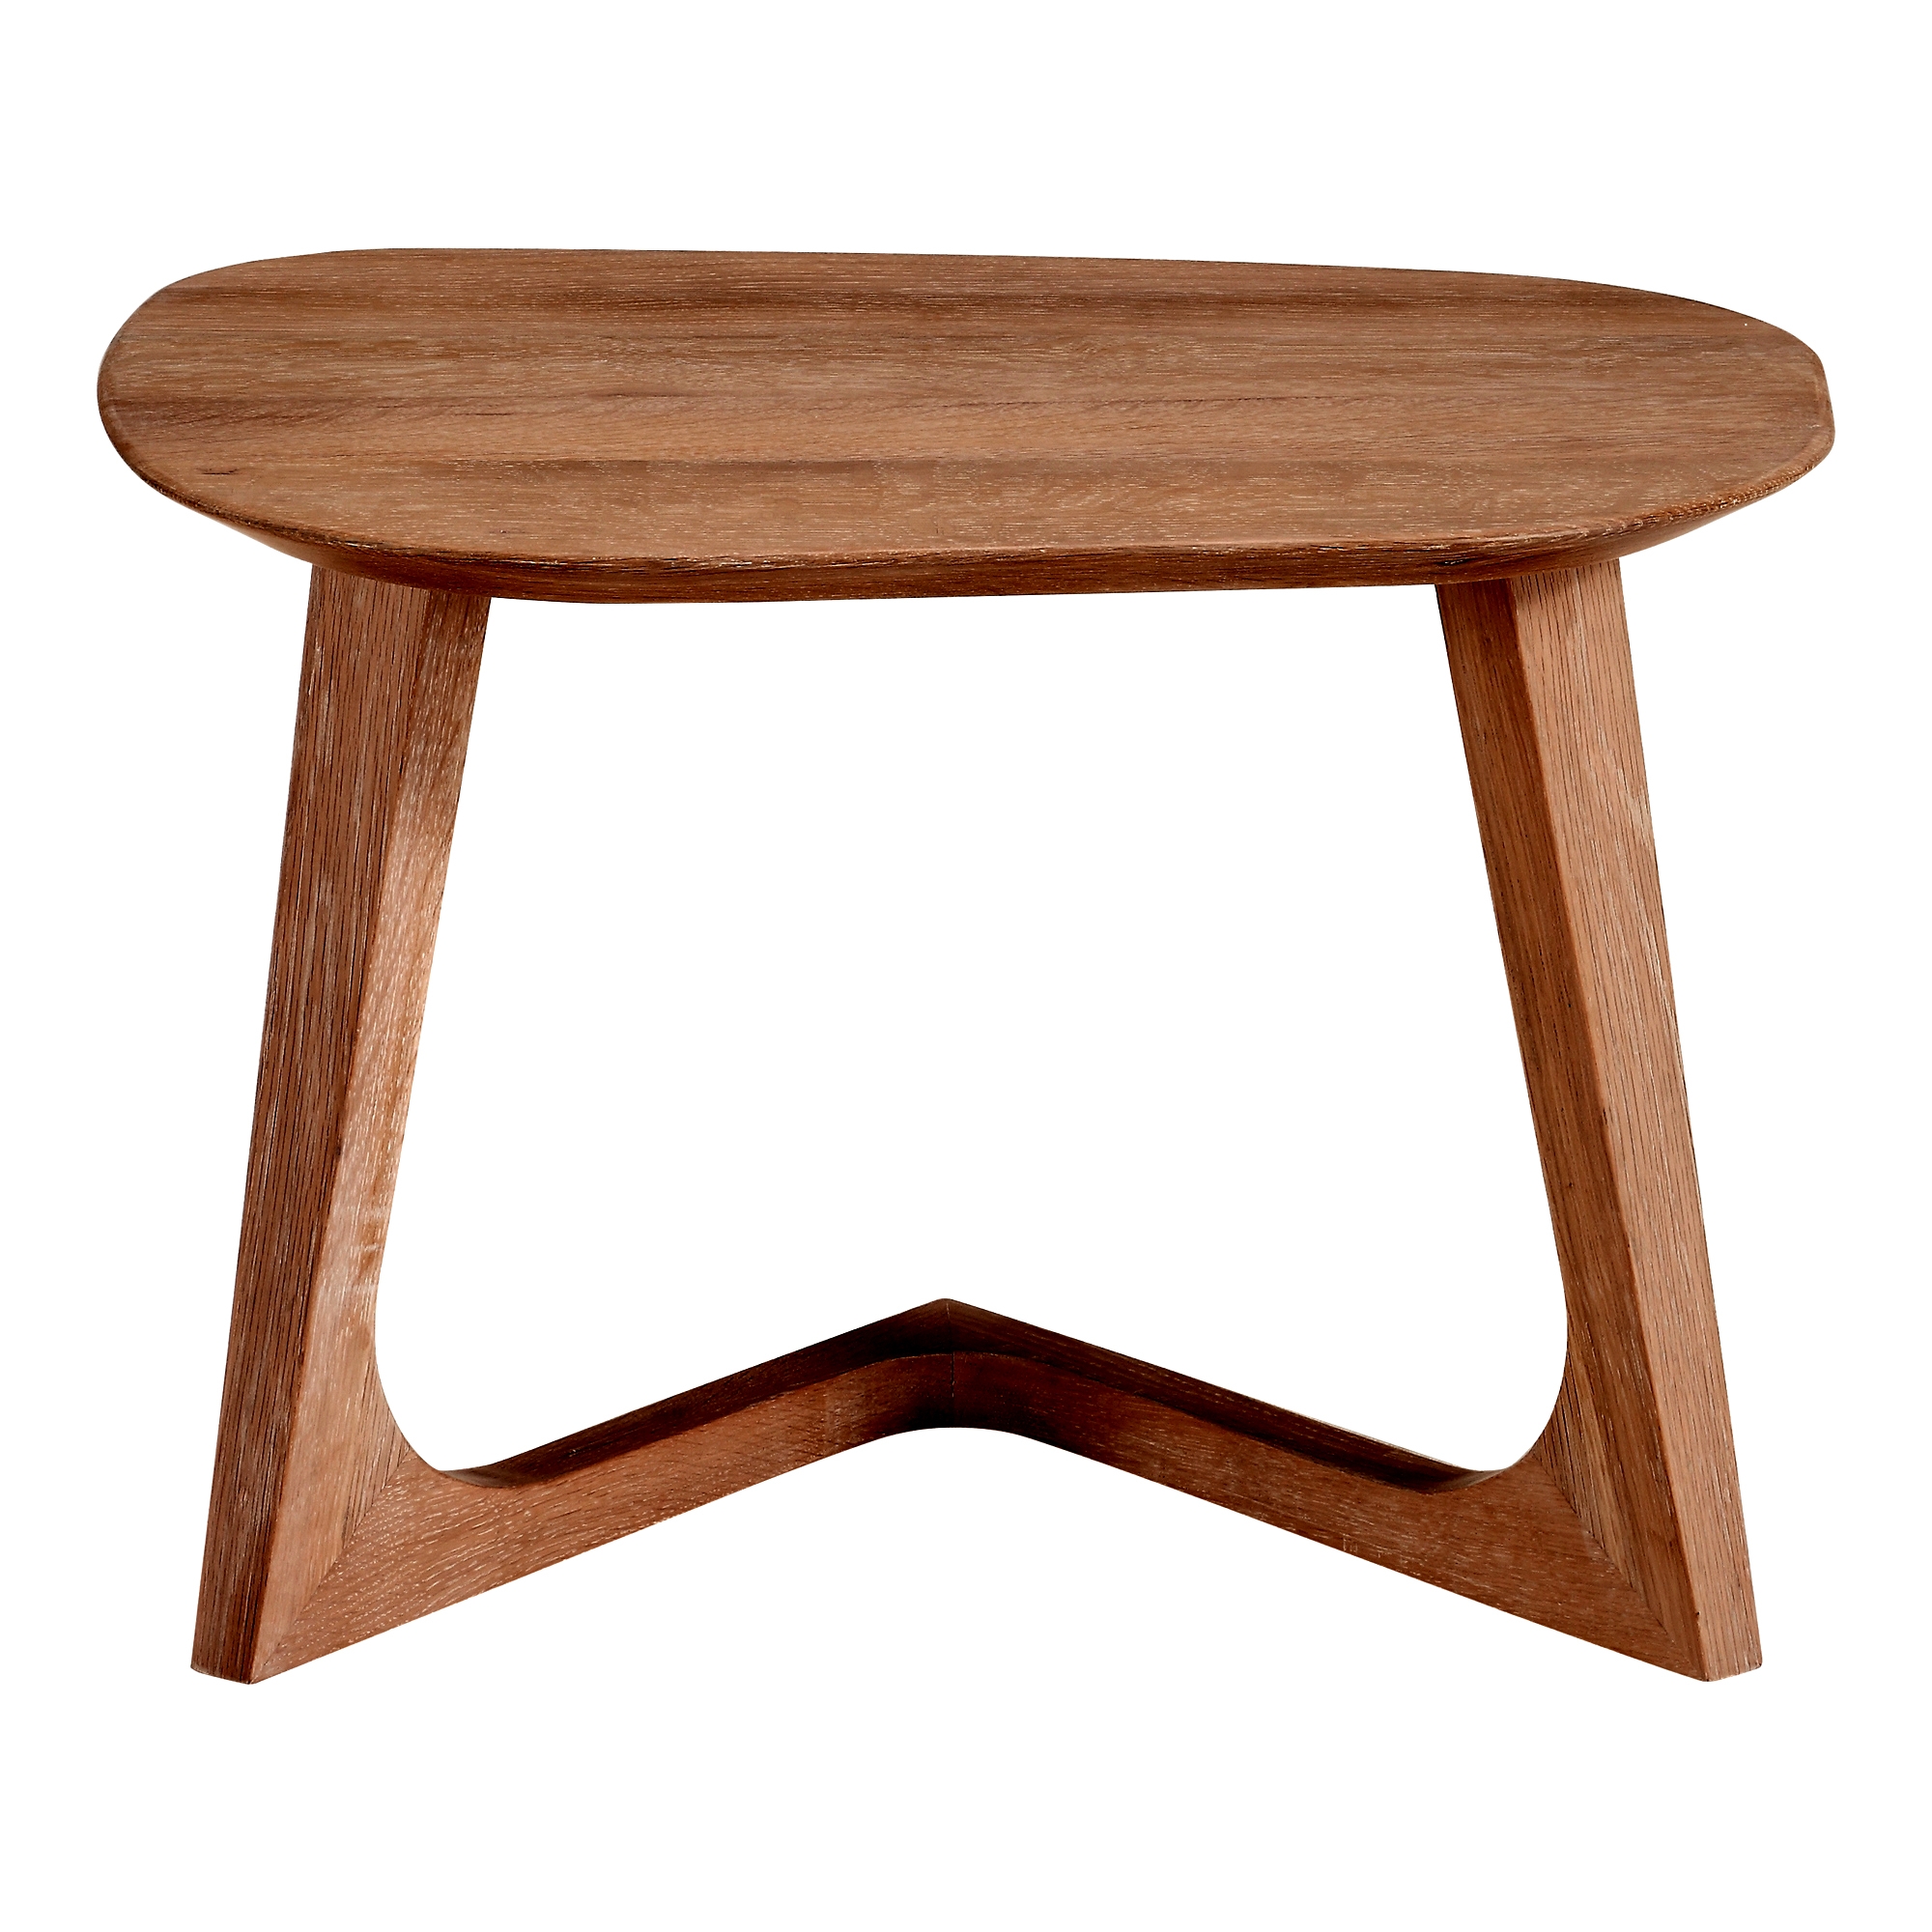 GODENZA END TABLE - Image 0